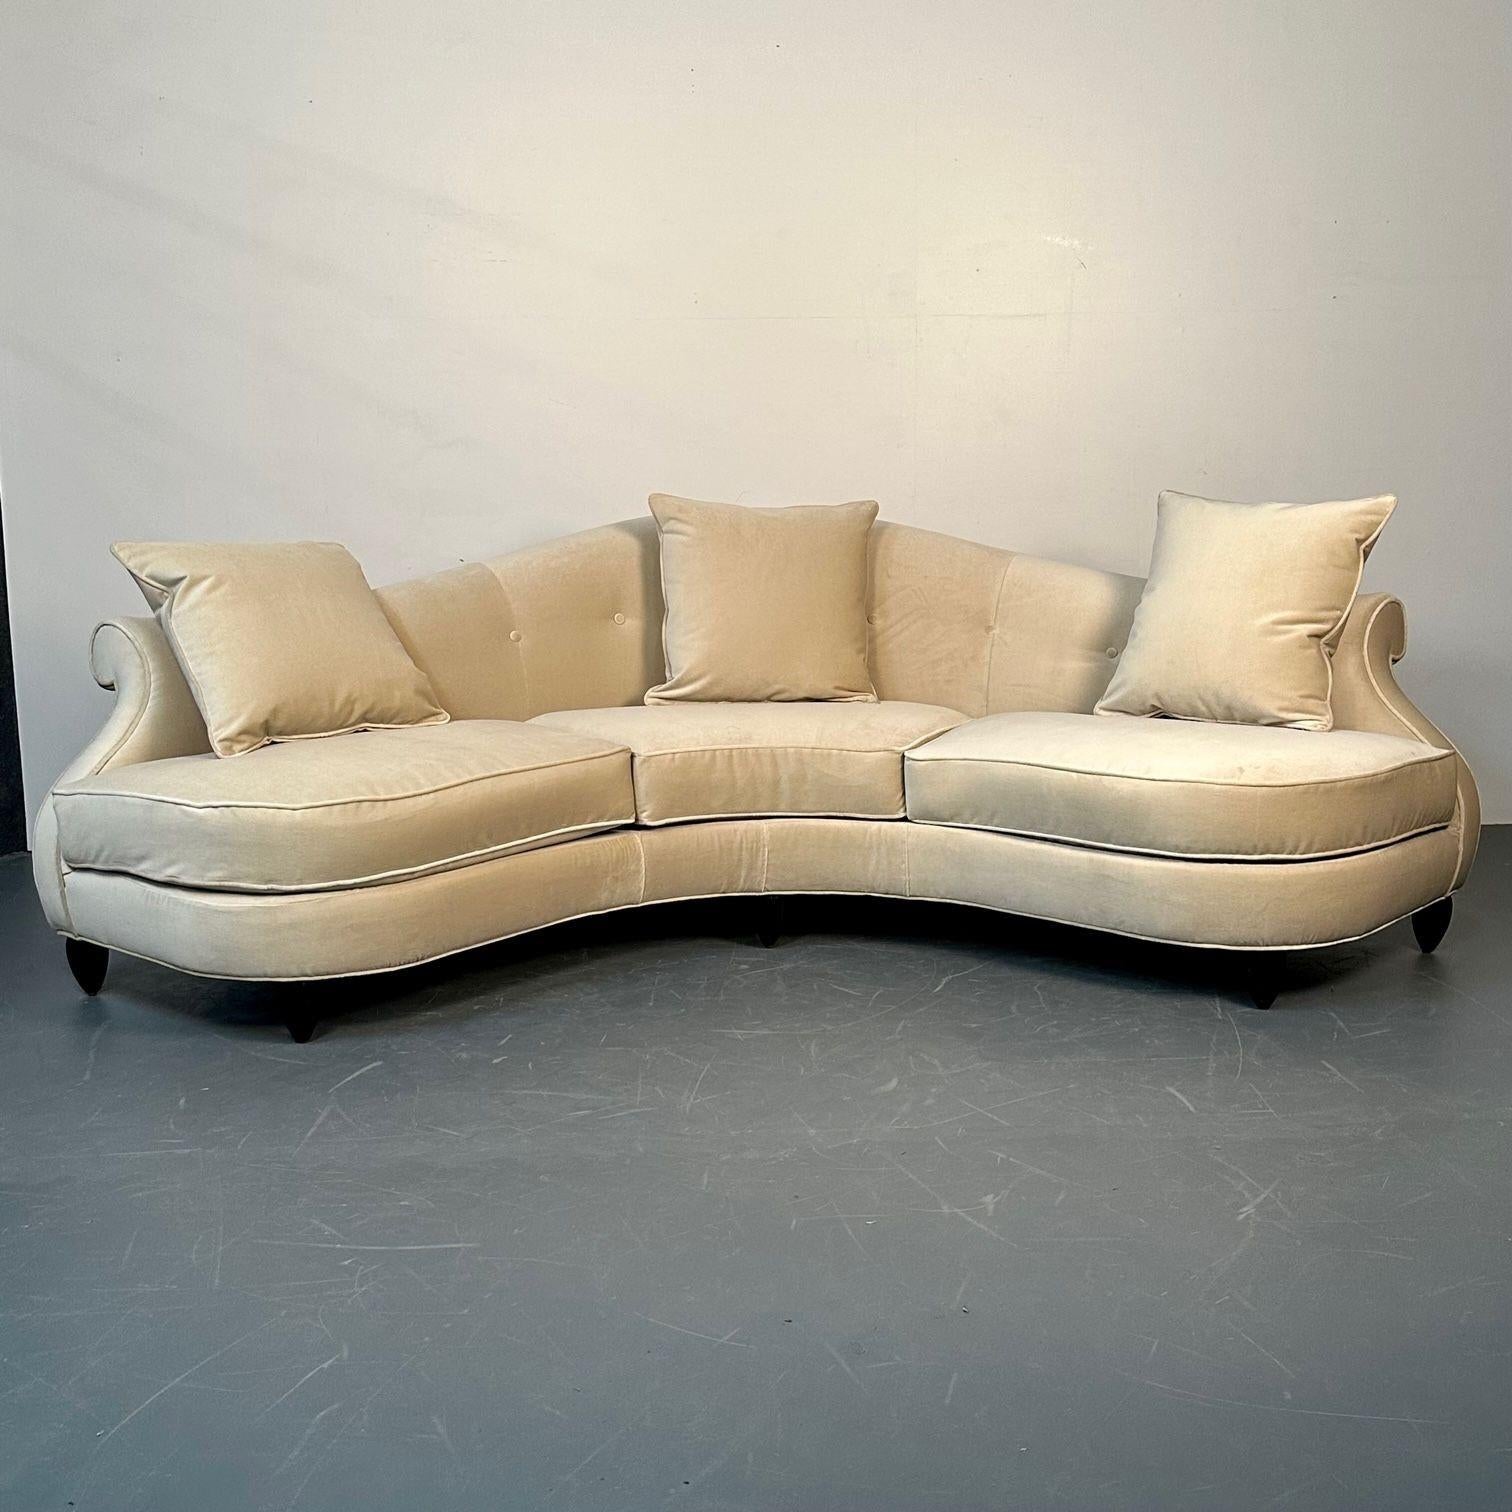 Christopher Guy, Modern, Curved Lafite Sofa, Beige Velvet, Black Wood, 2010s In Good Condition For Sale In Stamford, CT